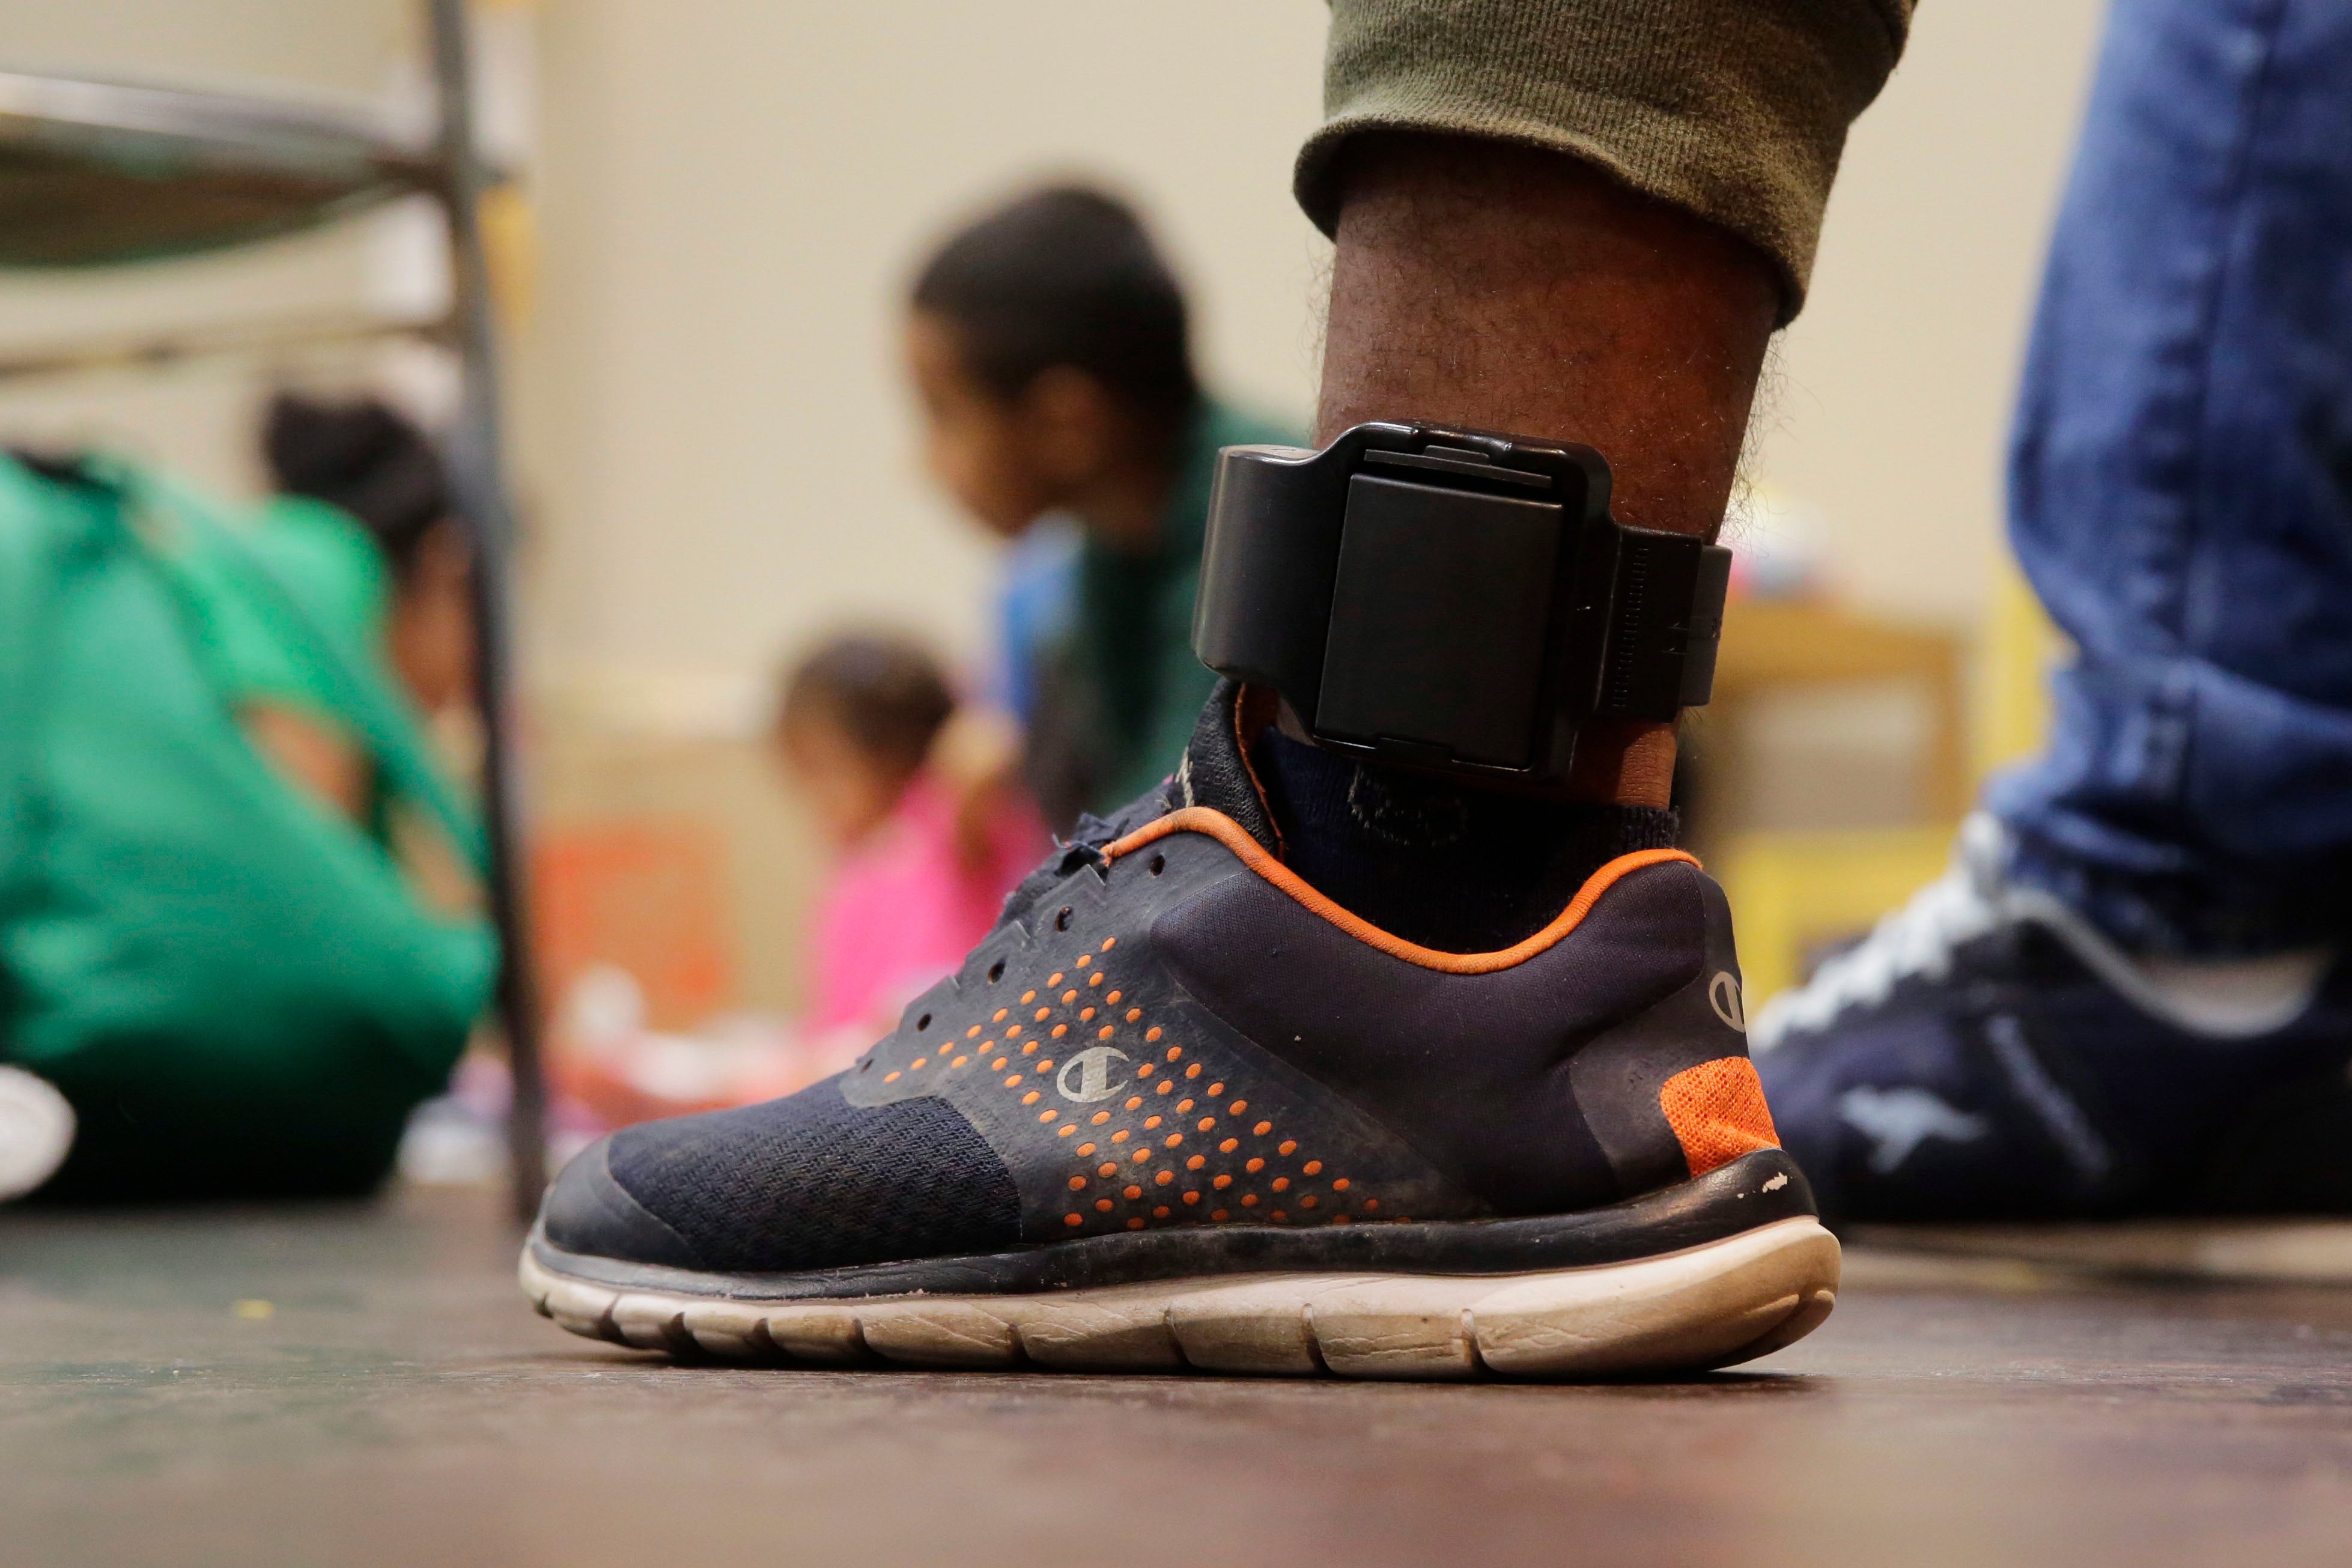 Close-up of a person wearing sneakers and an ankle monitor